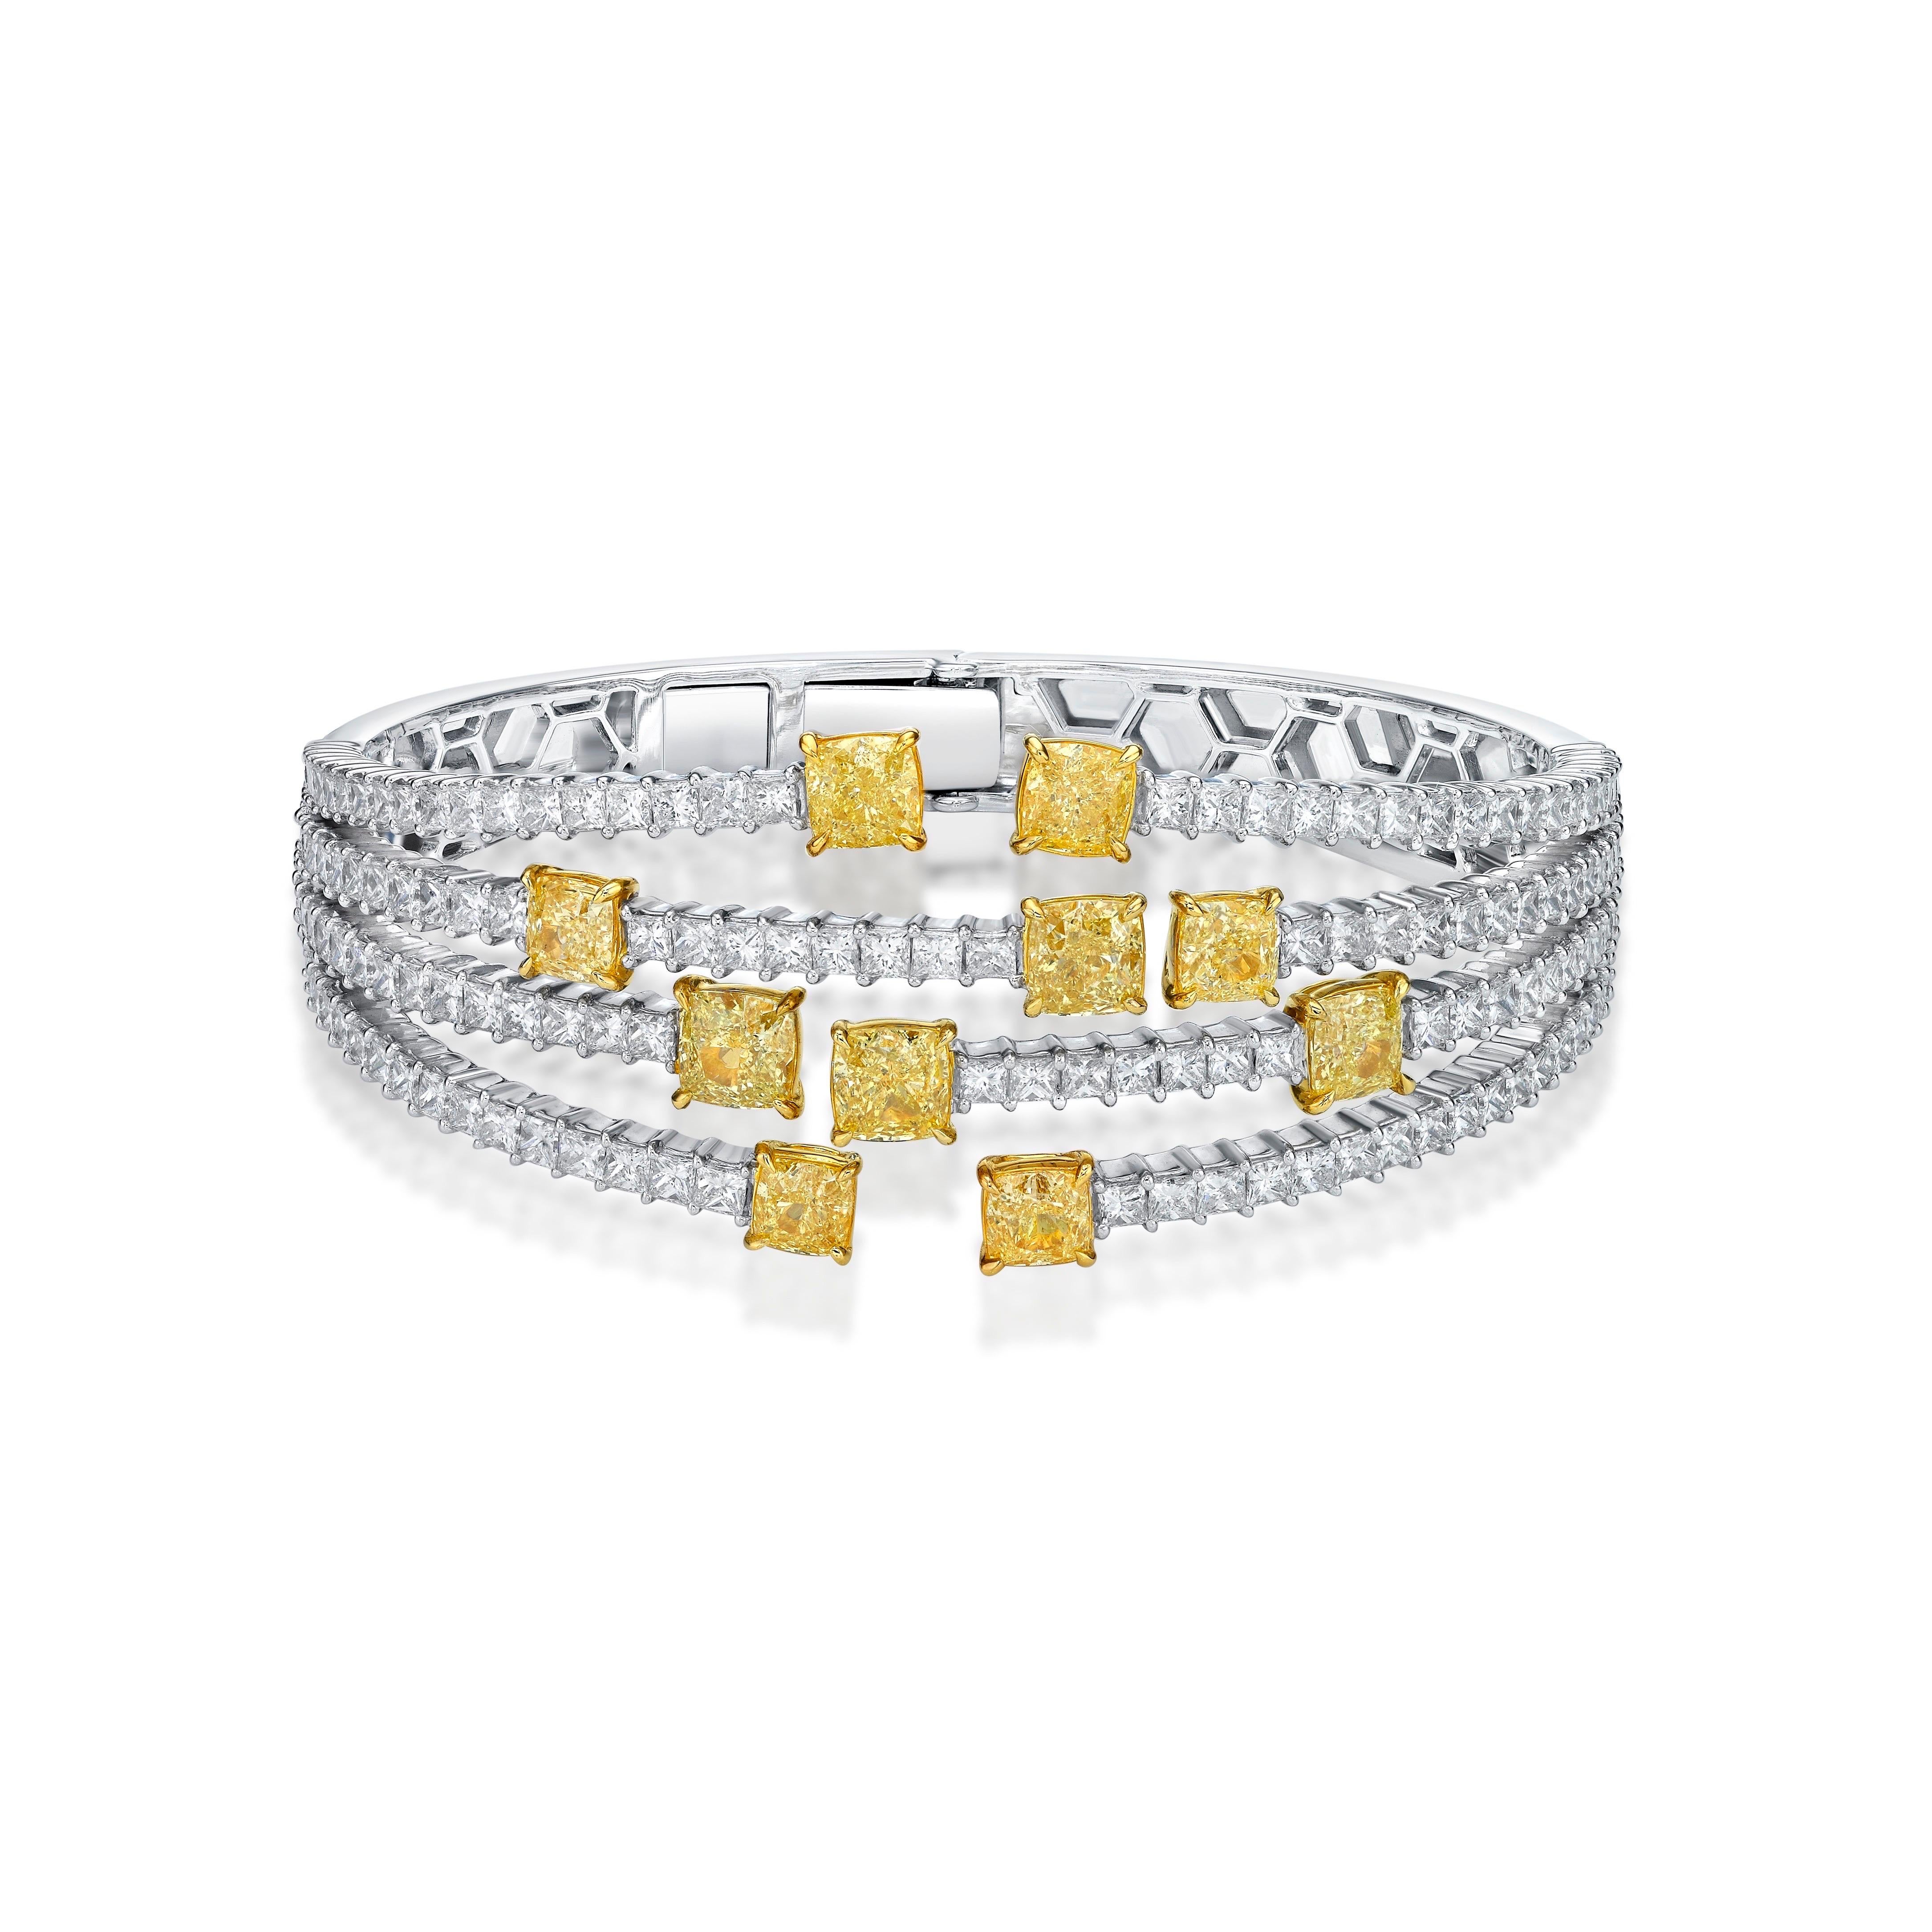 10 cushion diamonds 6.63ct
169 colorless vs natural white diamonds total approx 6.11ct


From The Museum Vault at Emilio Jewelry Located on New York's iconic Fifth Avenue,
Showcasing a very special and rare natural yellow diamonds set in the center,